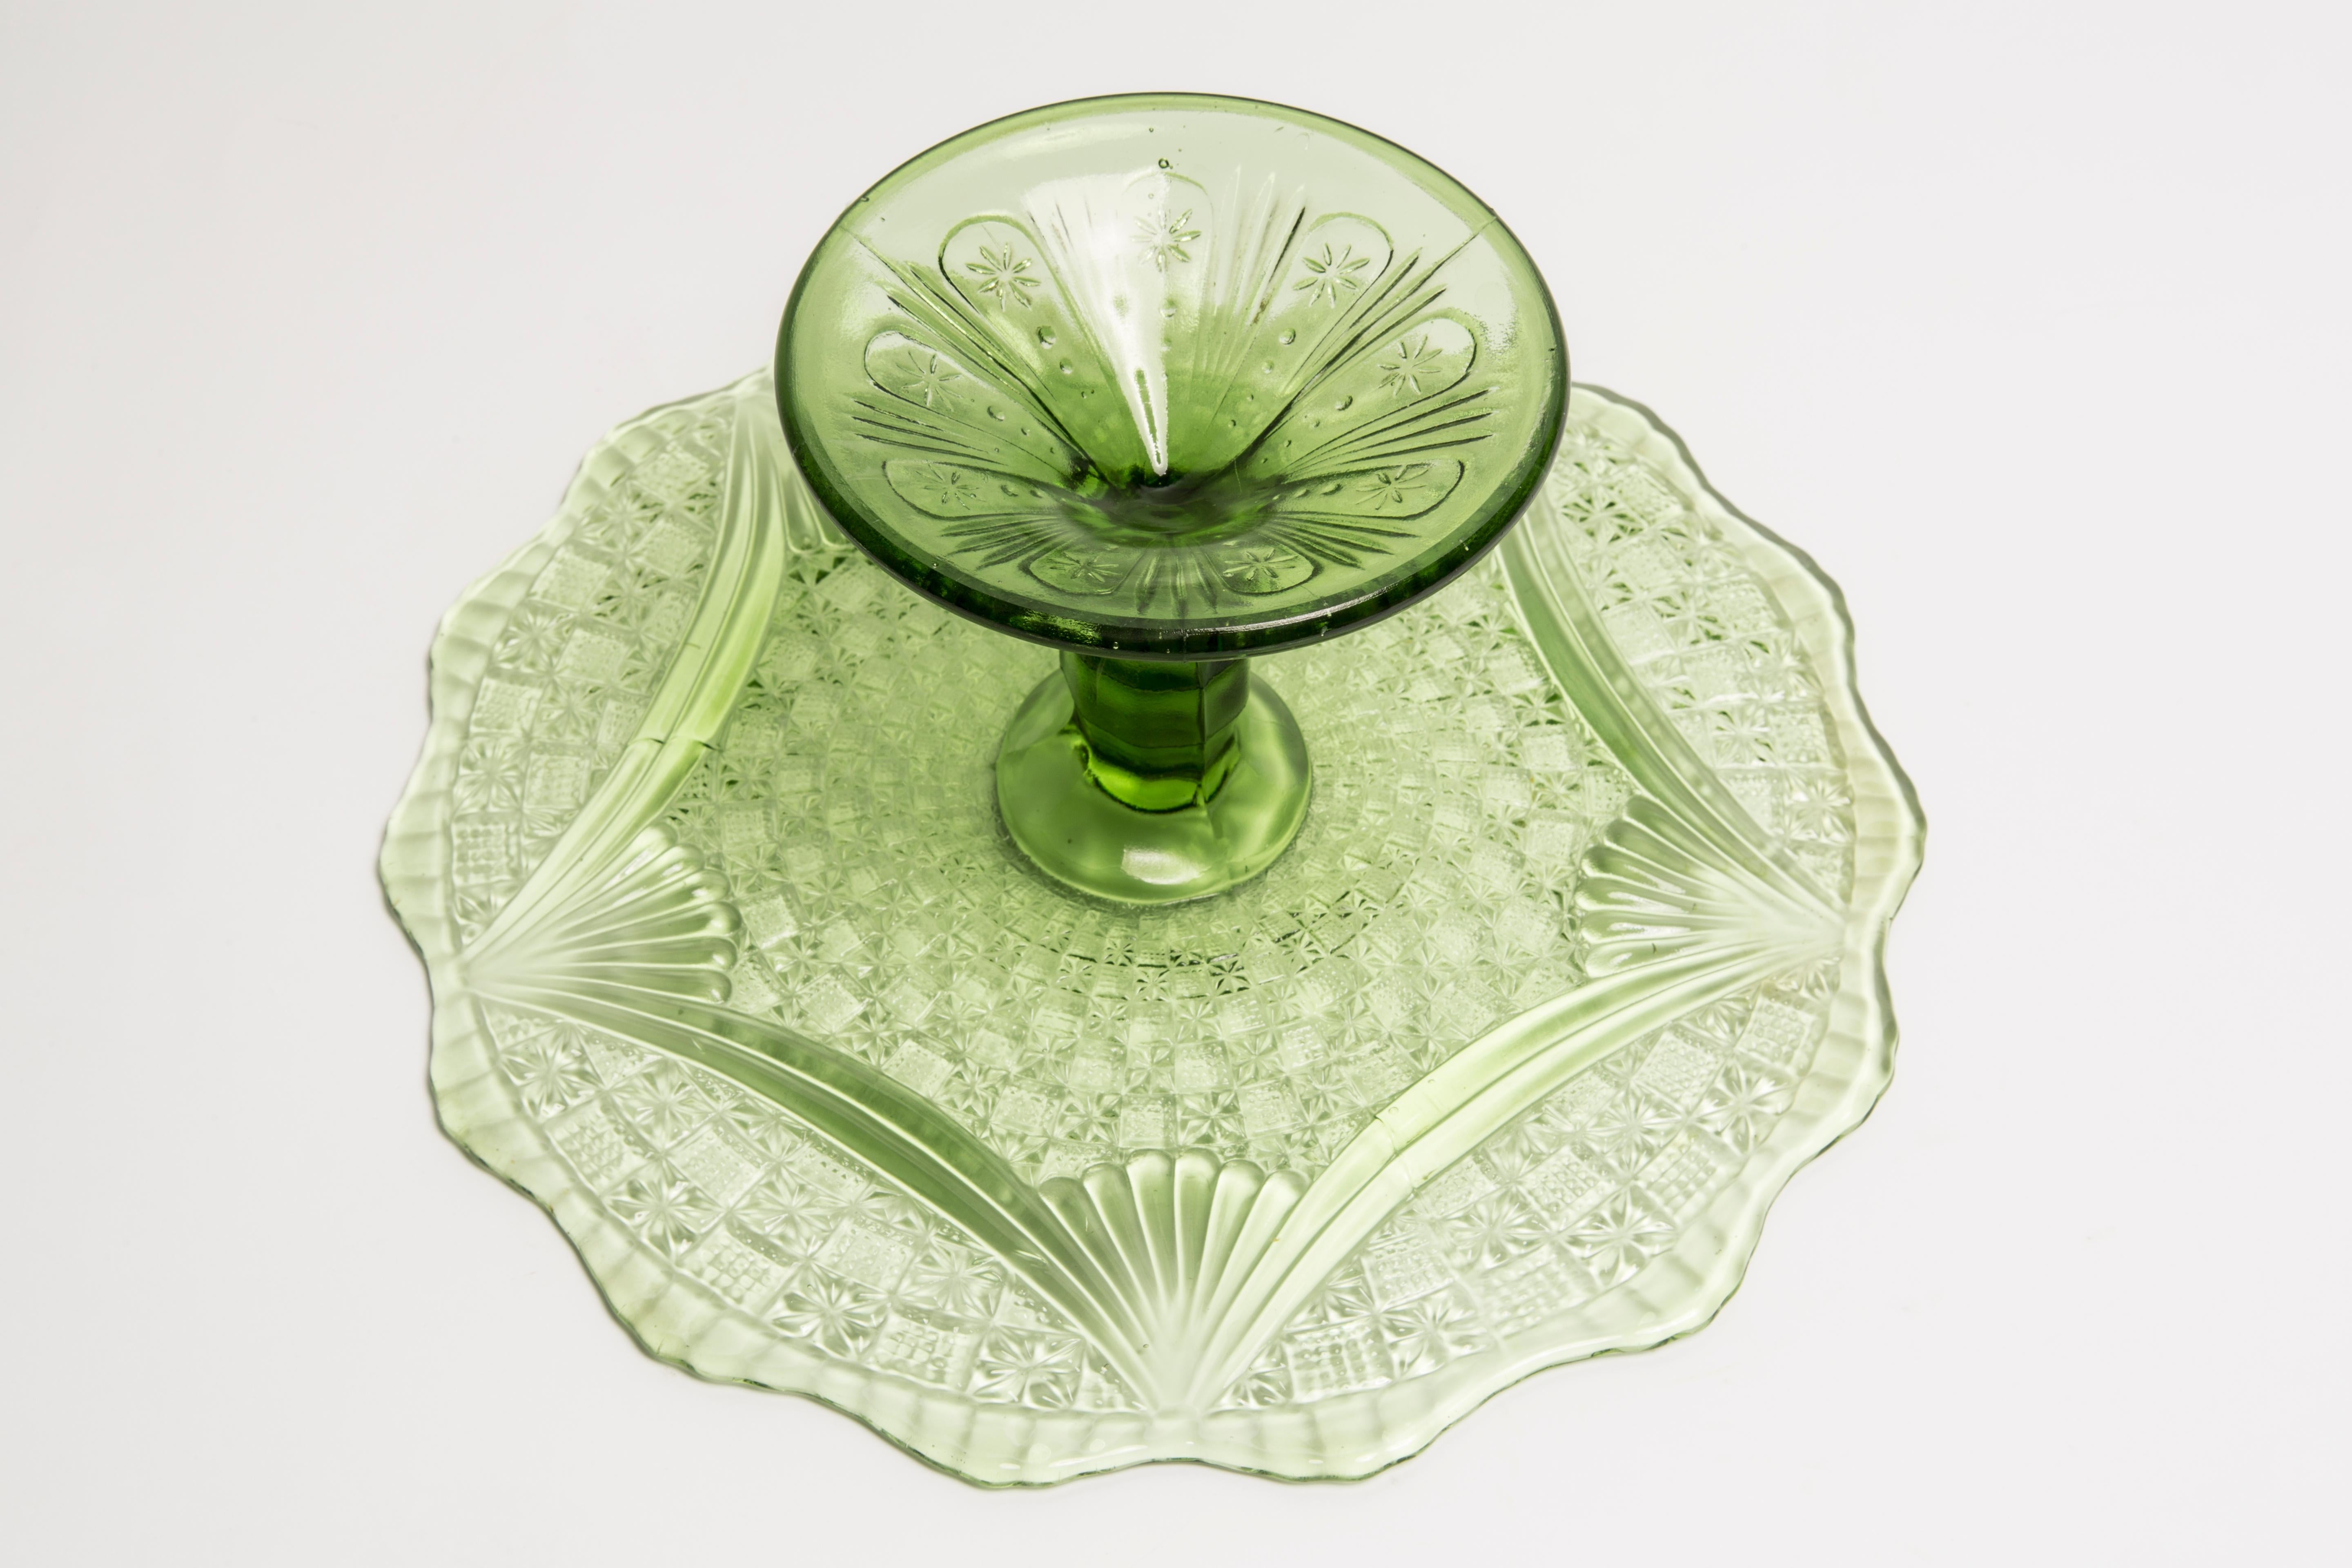 Vintage Green Decorative Glass Plate or Cake Stand, Italy, 1960s 1